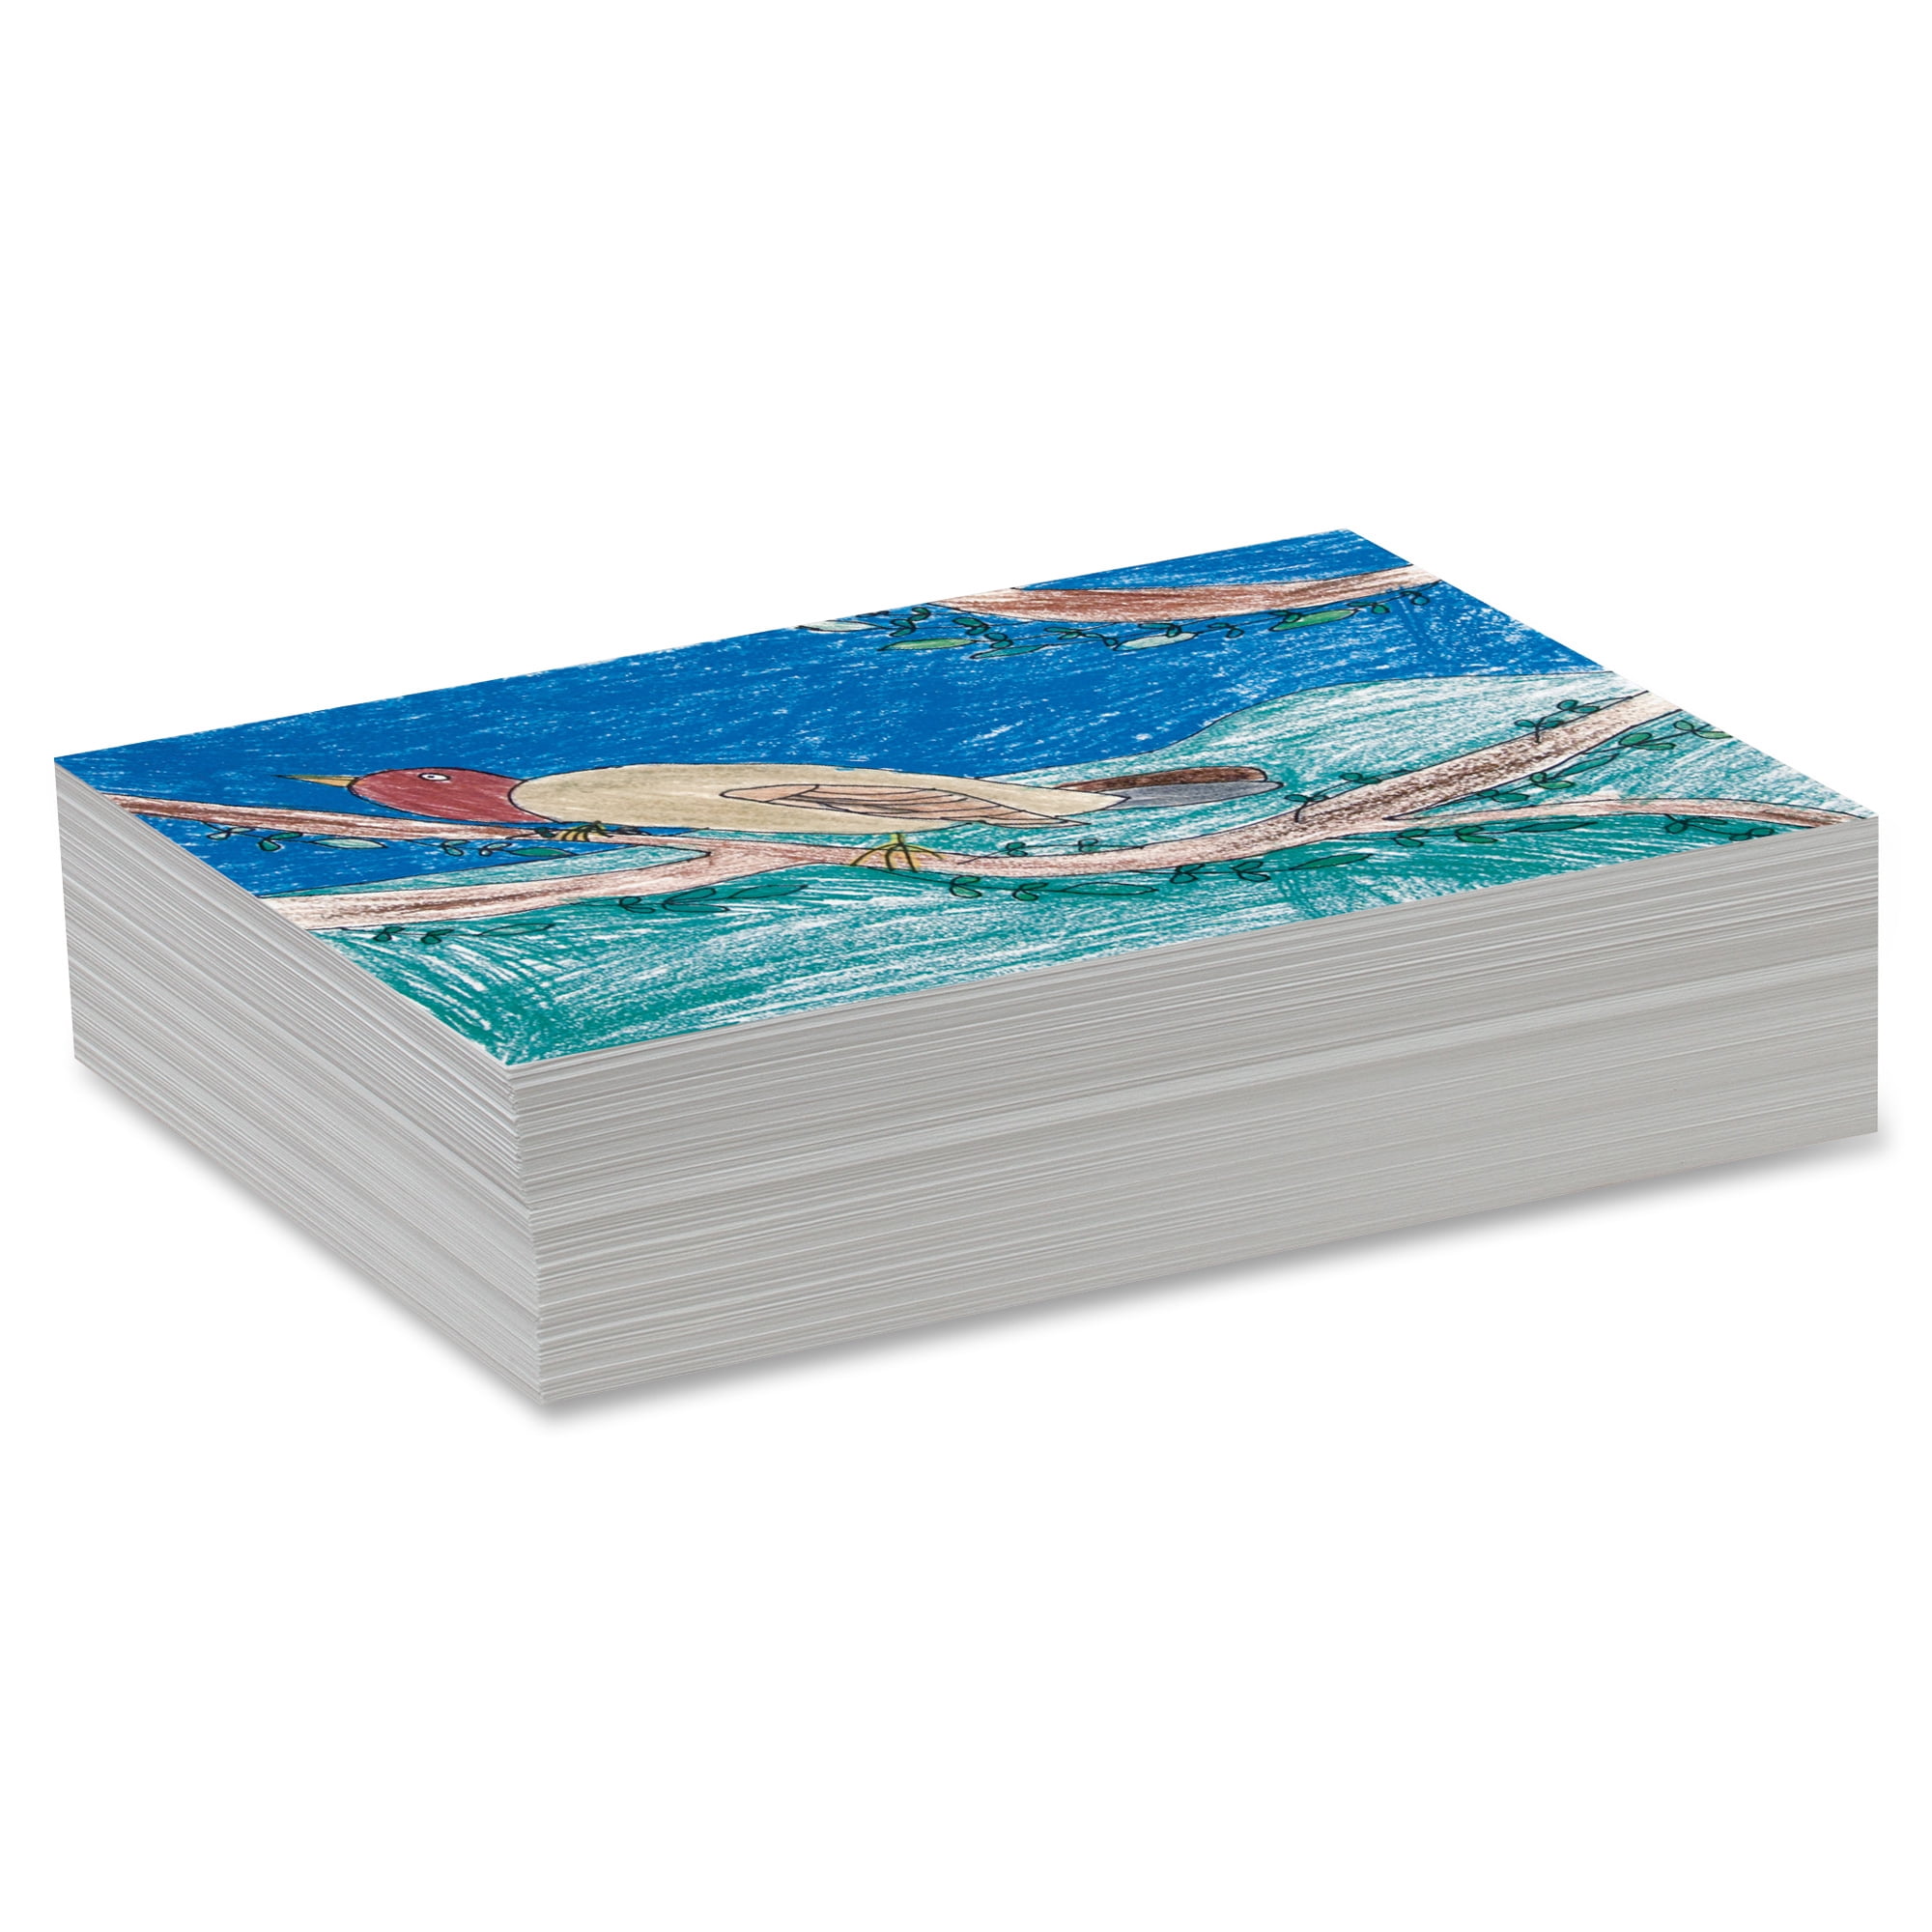 Buy Bright White Sulphite Drawing Paper, 12 x 18, 50 lb at S&S Worldwide